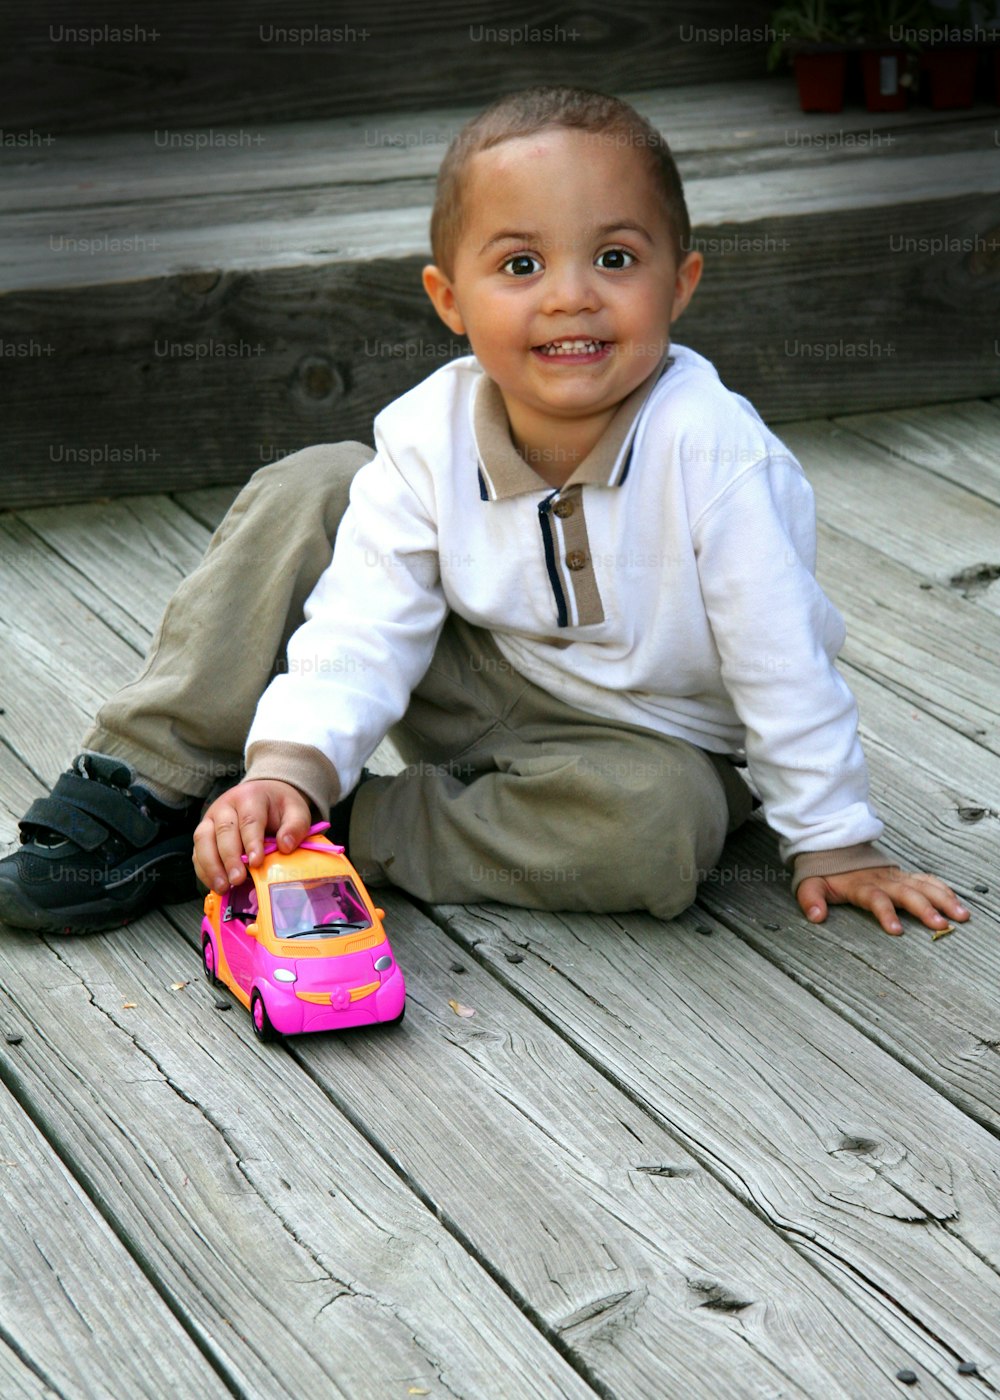 a young boy sitting on the ground with a toy car